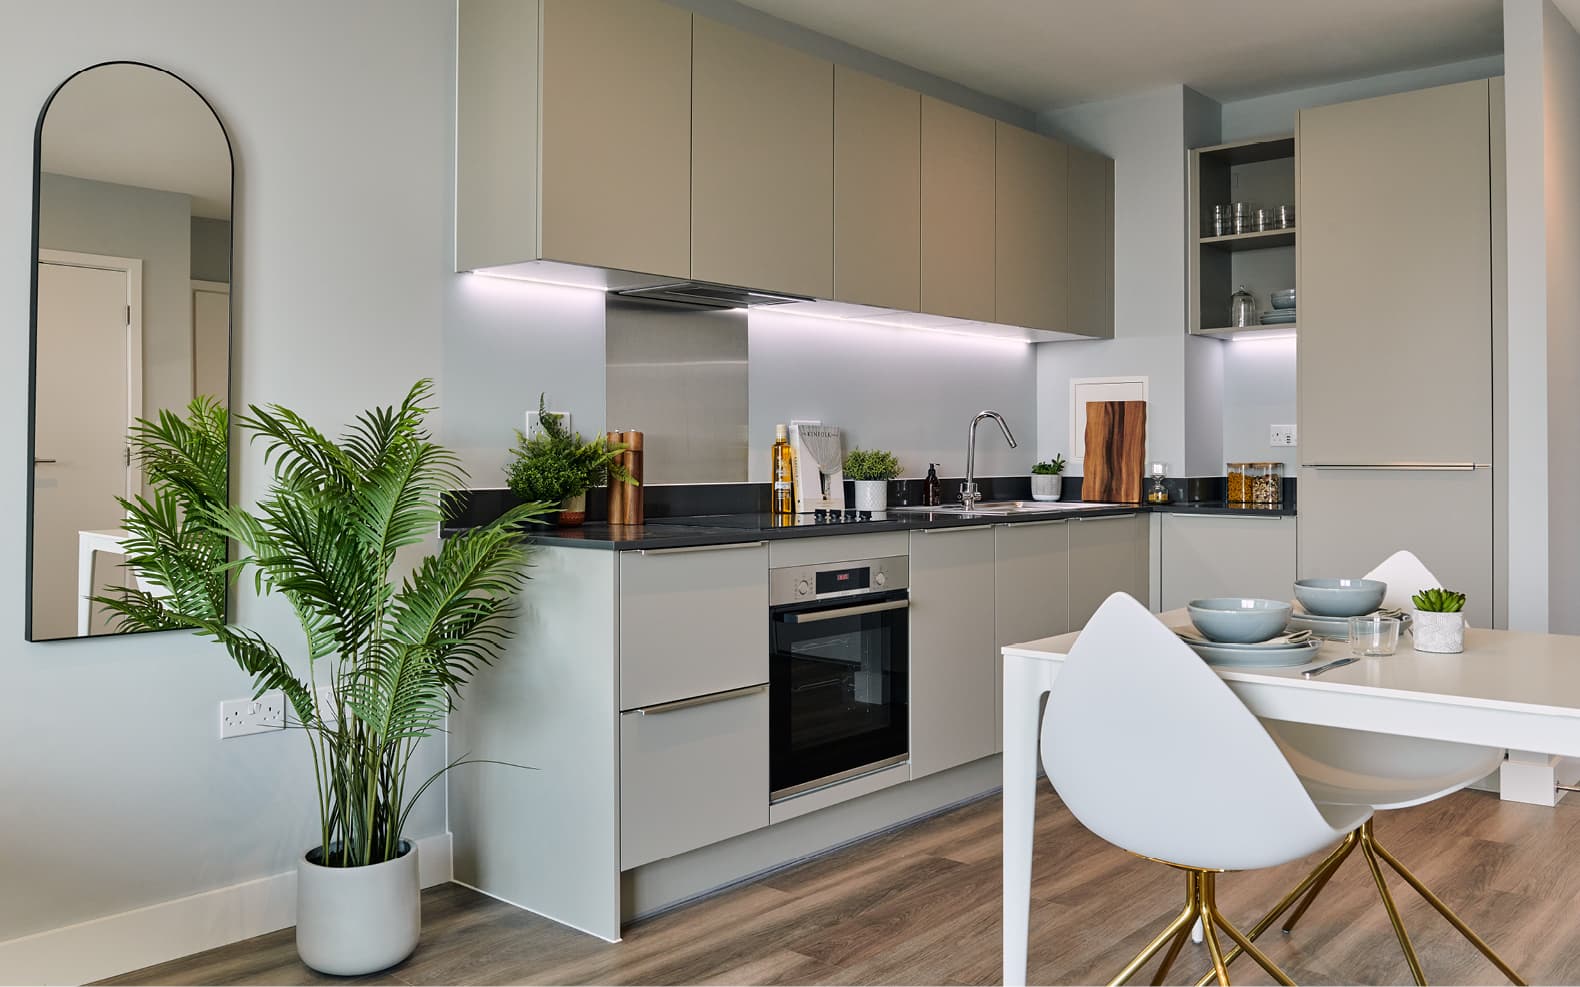 kitchen units with light under wall units, mirror on wall and plant in pot